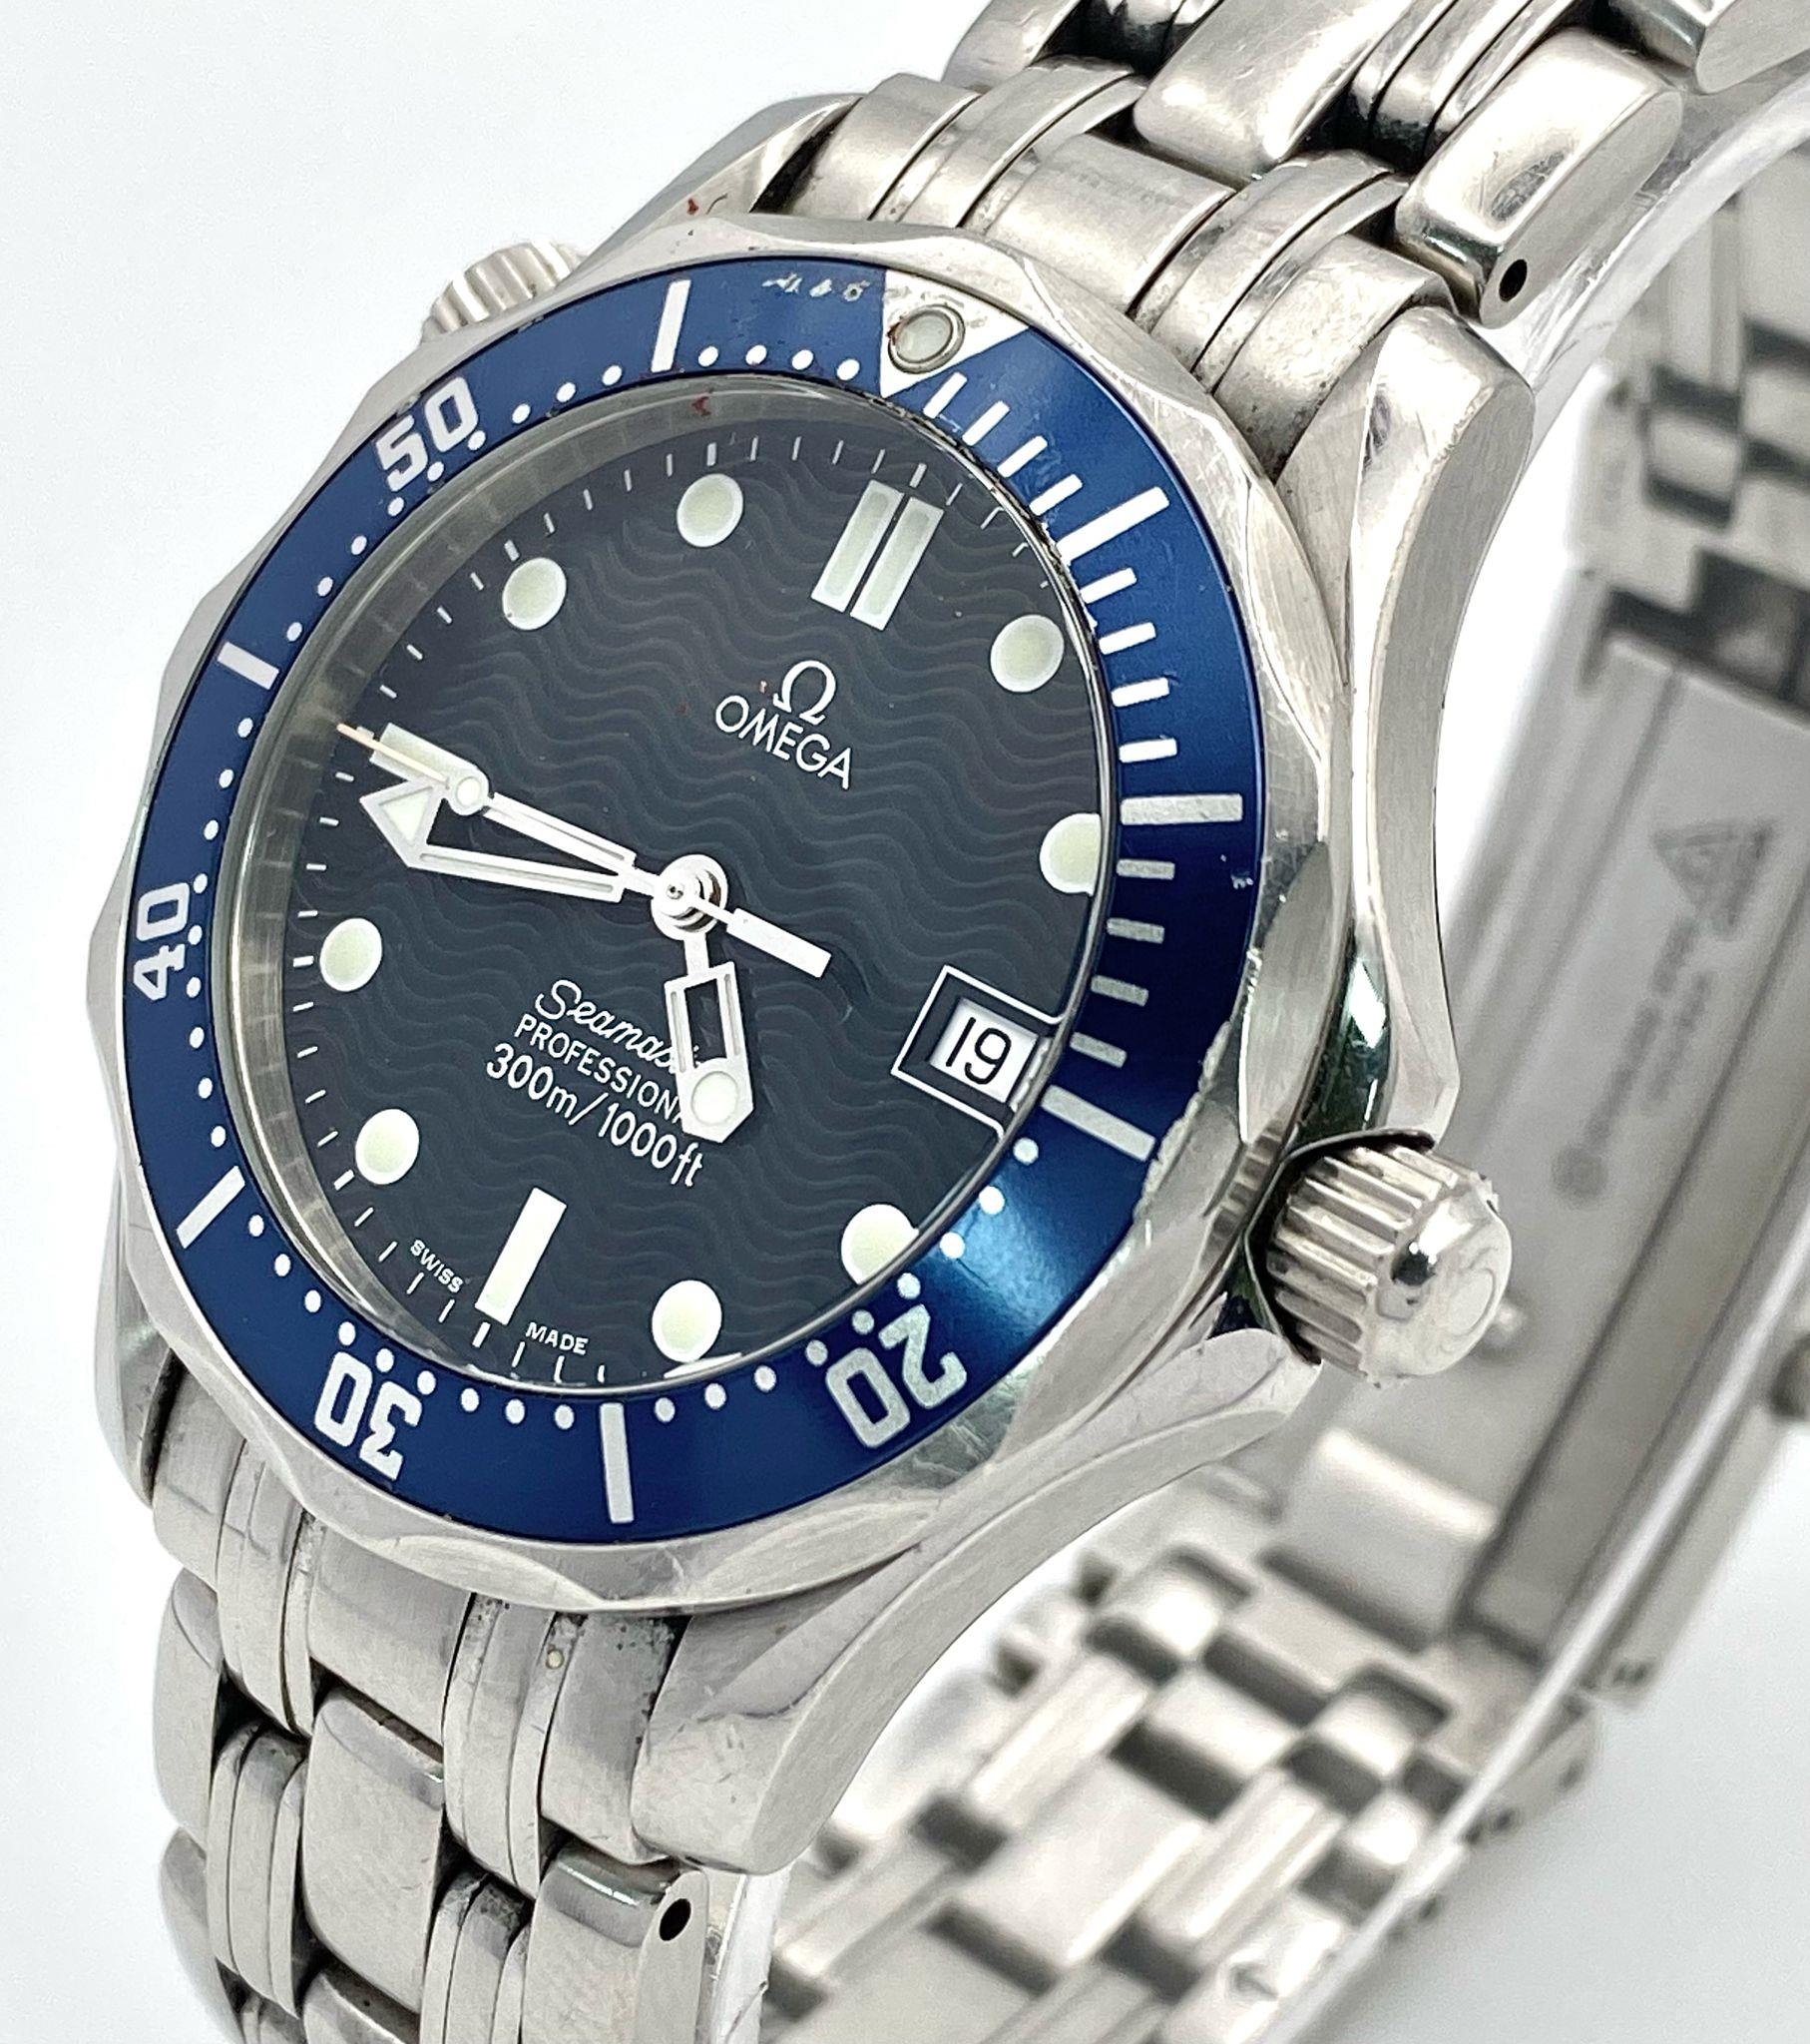 An Omega Seamaster Professional Quartz Divers Watch. Stainless steel bracelet and case - 37mm. - Image 4 of 9